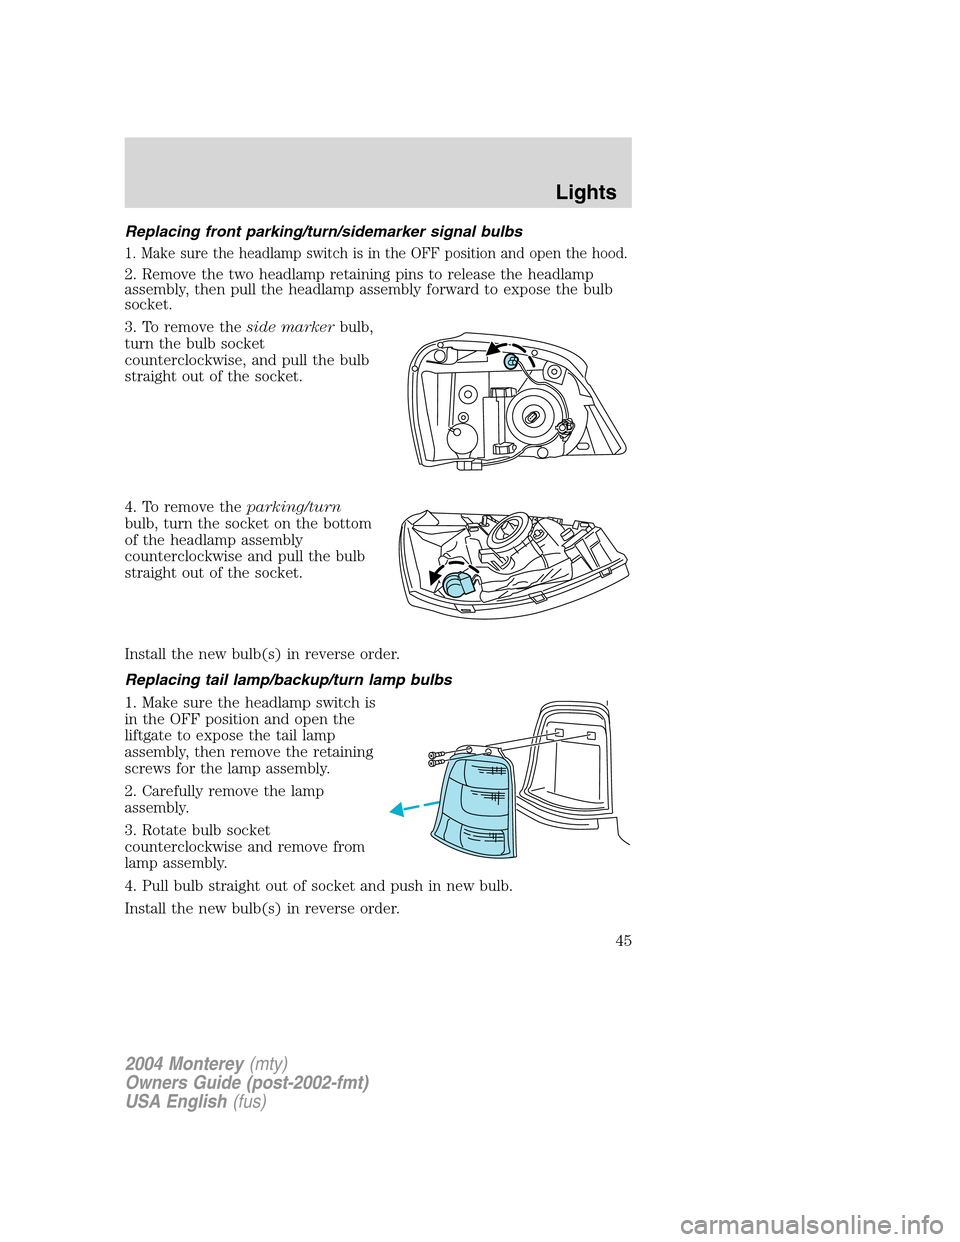 Mercury Monterey 2004  s Service Manual Replacing front parking/turn/sidemarker signal bulbs
1. Make sure the headlamp switch is in the OFF position and open the hood.
2. Remove the two headlamp retaining pins to release the headlamp
assemb